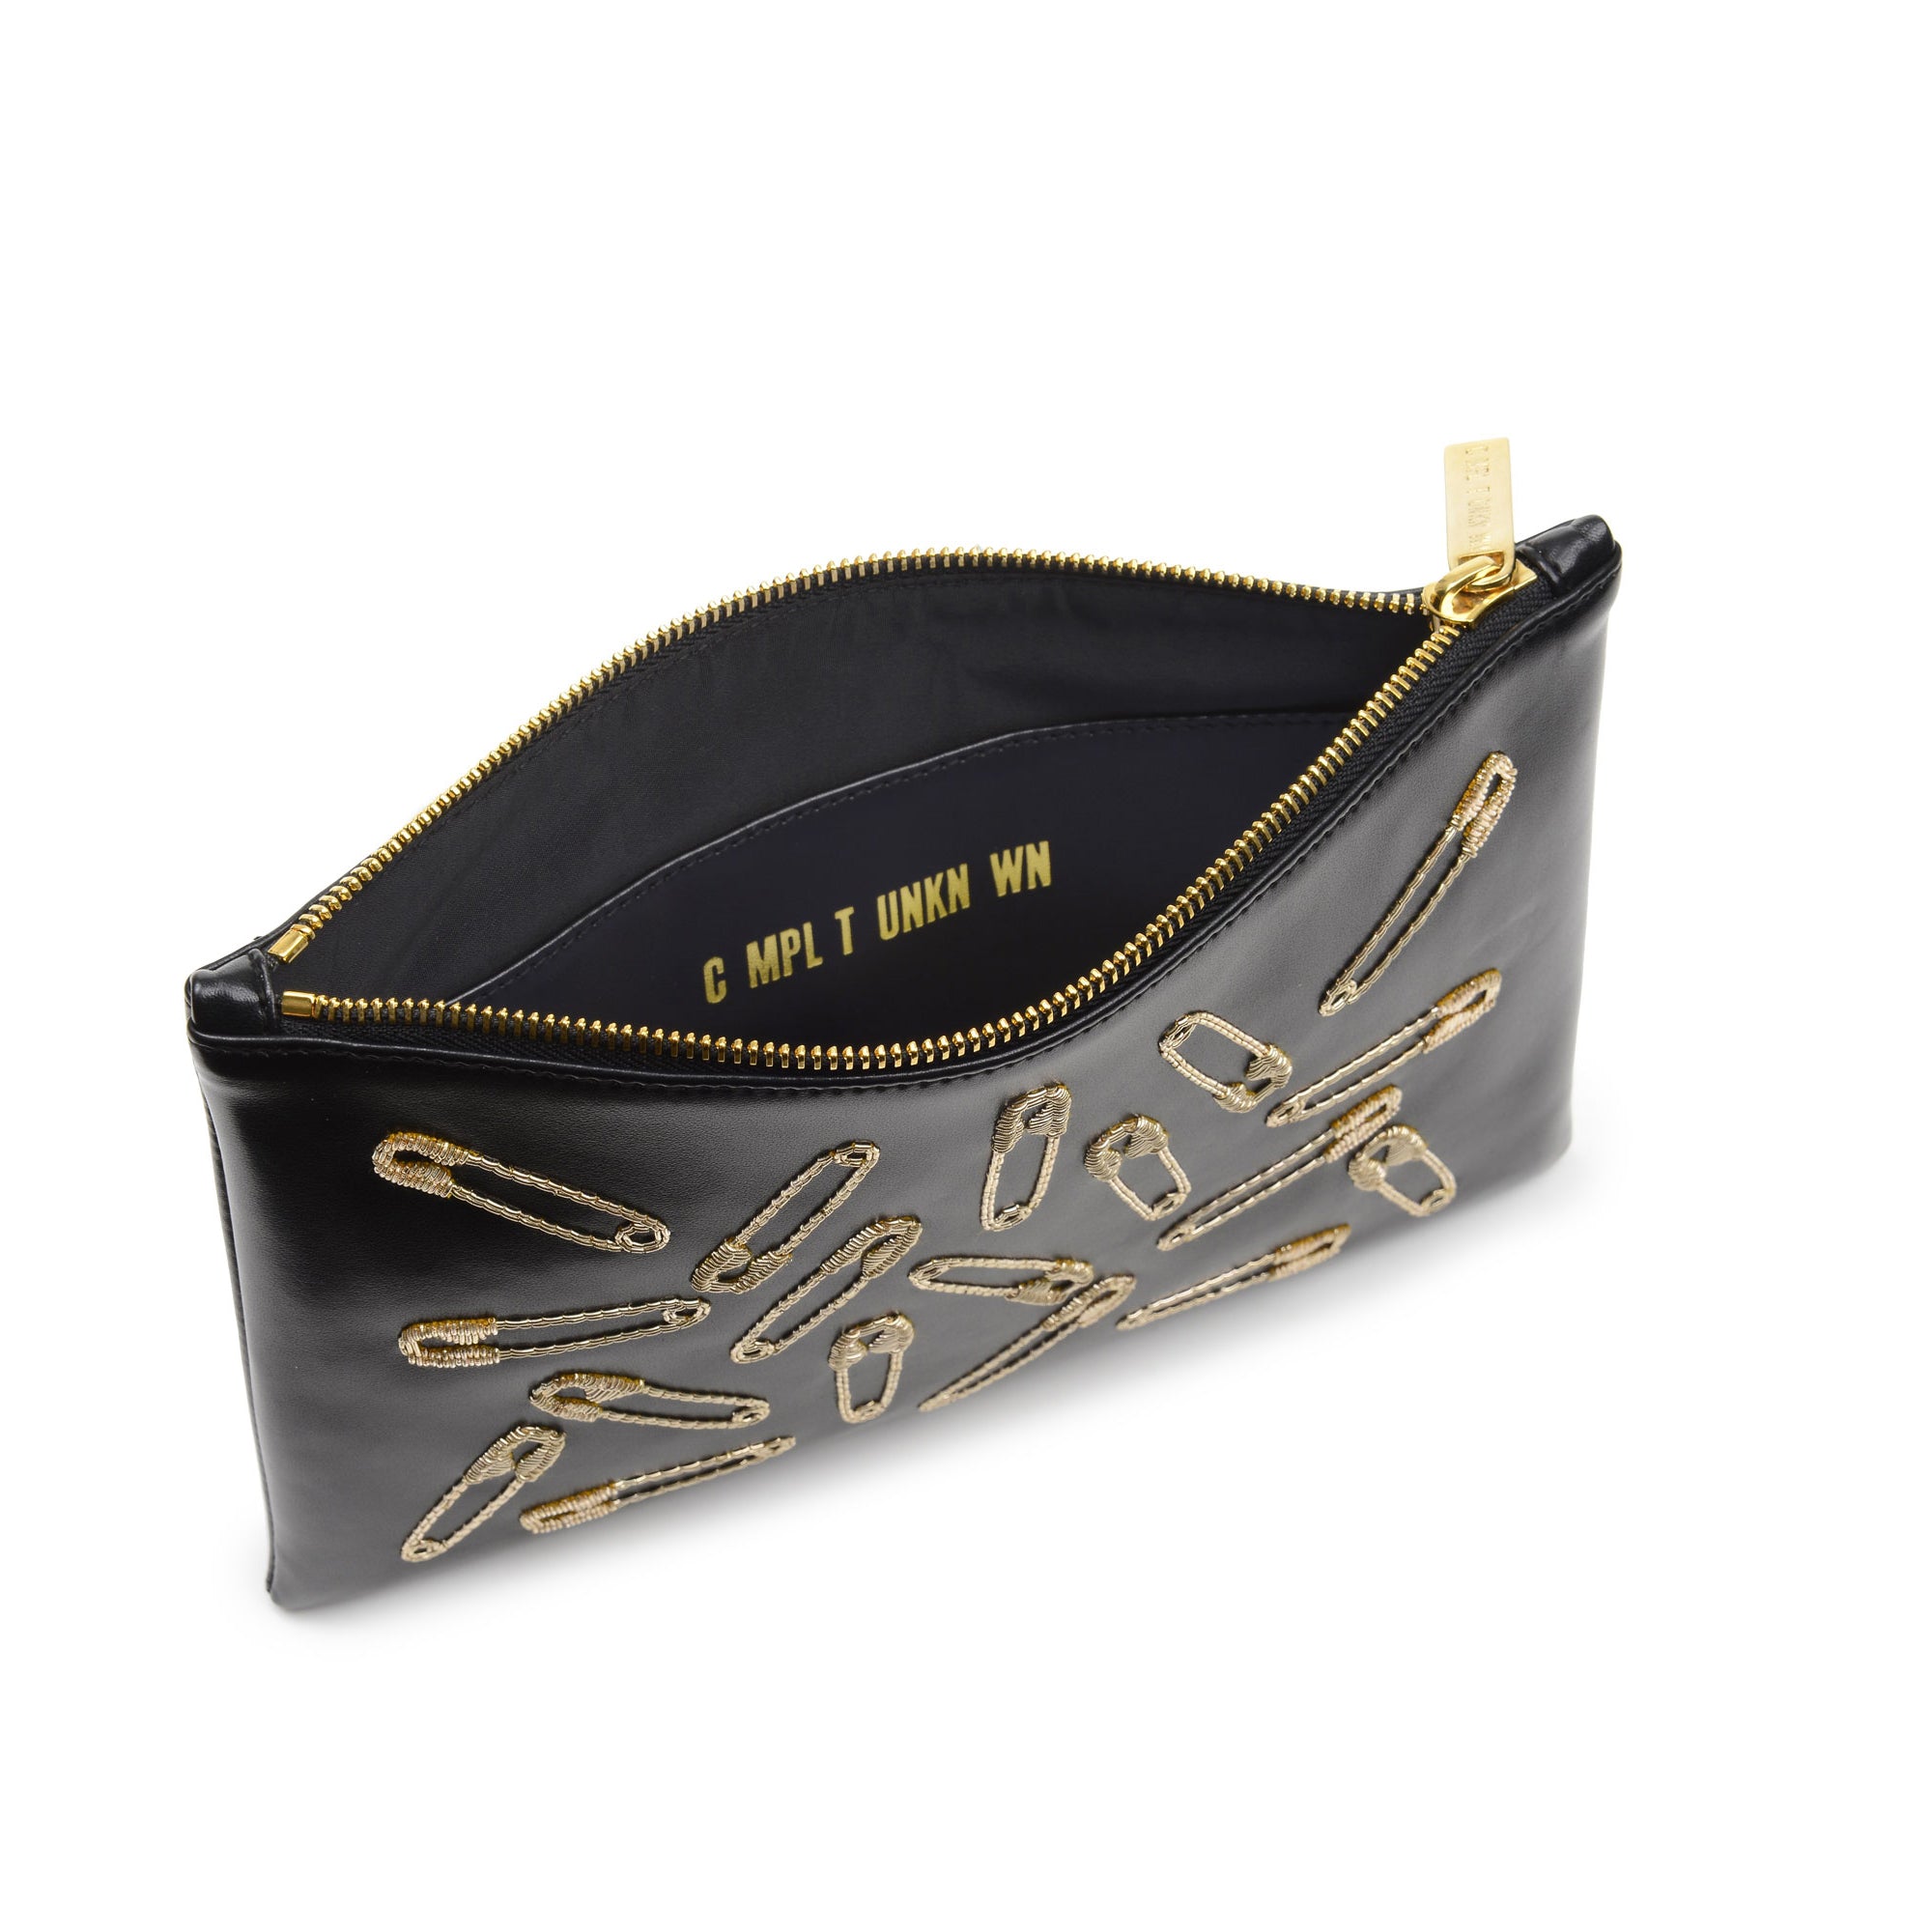 SAFETY PINS EMBROIDERED CLUTCH (GOLD)